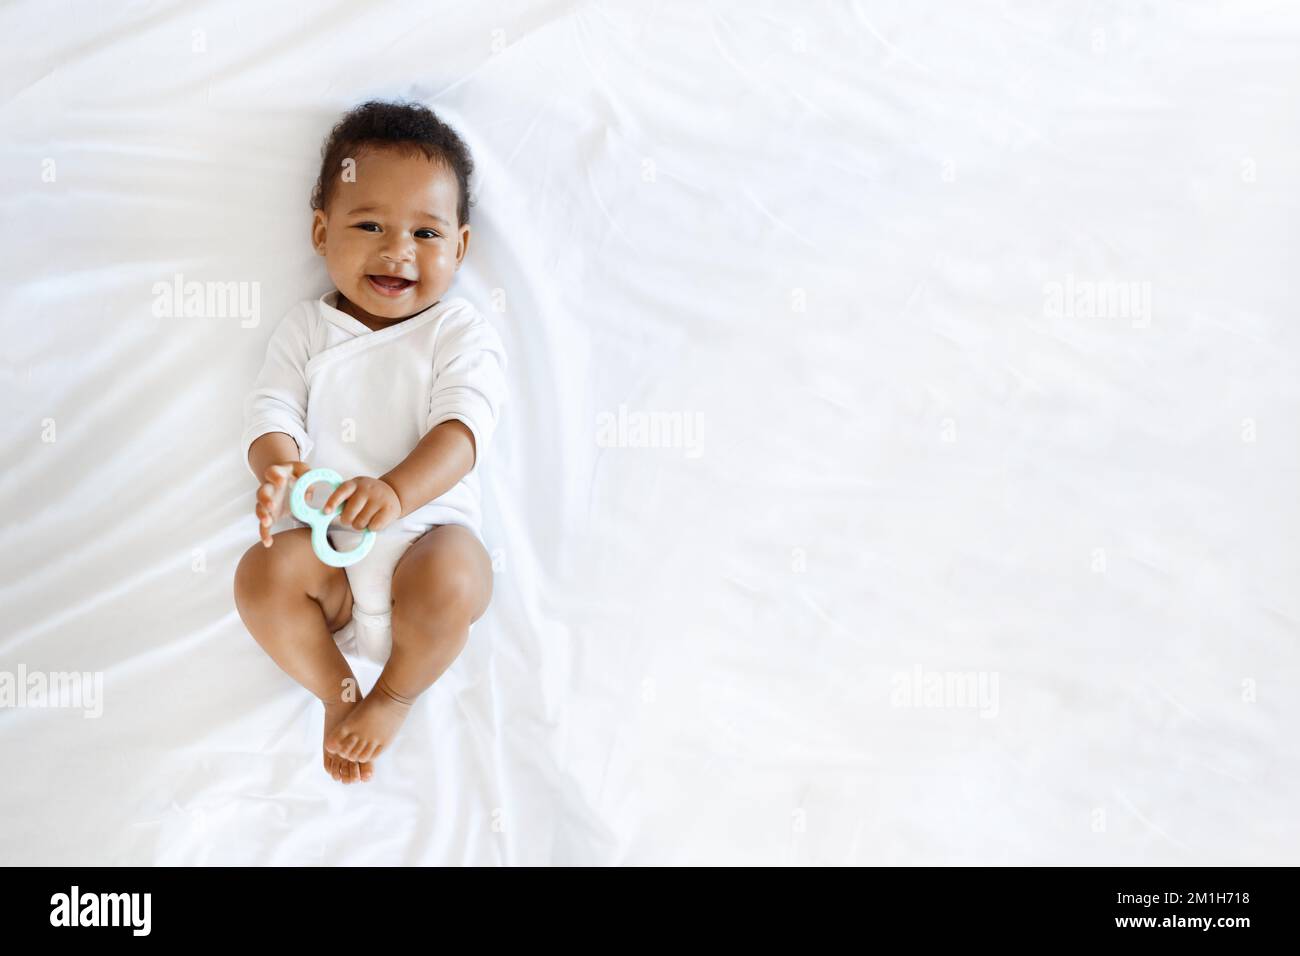 Childcare. Adorable Little Black Baby Lying On Bed With Teether In Hand Stock Photo